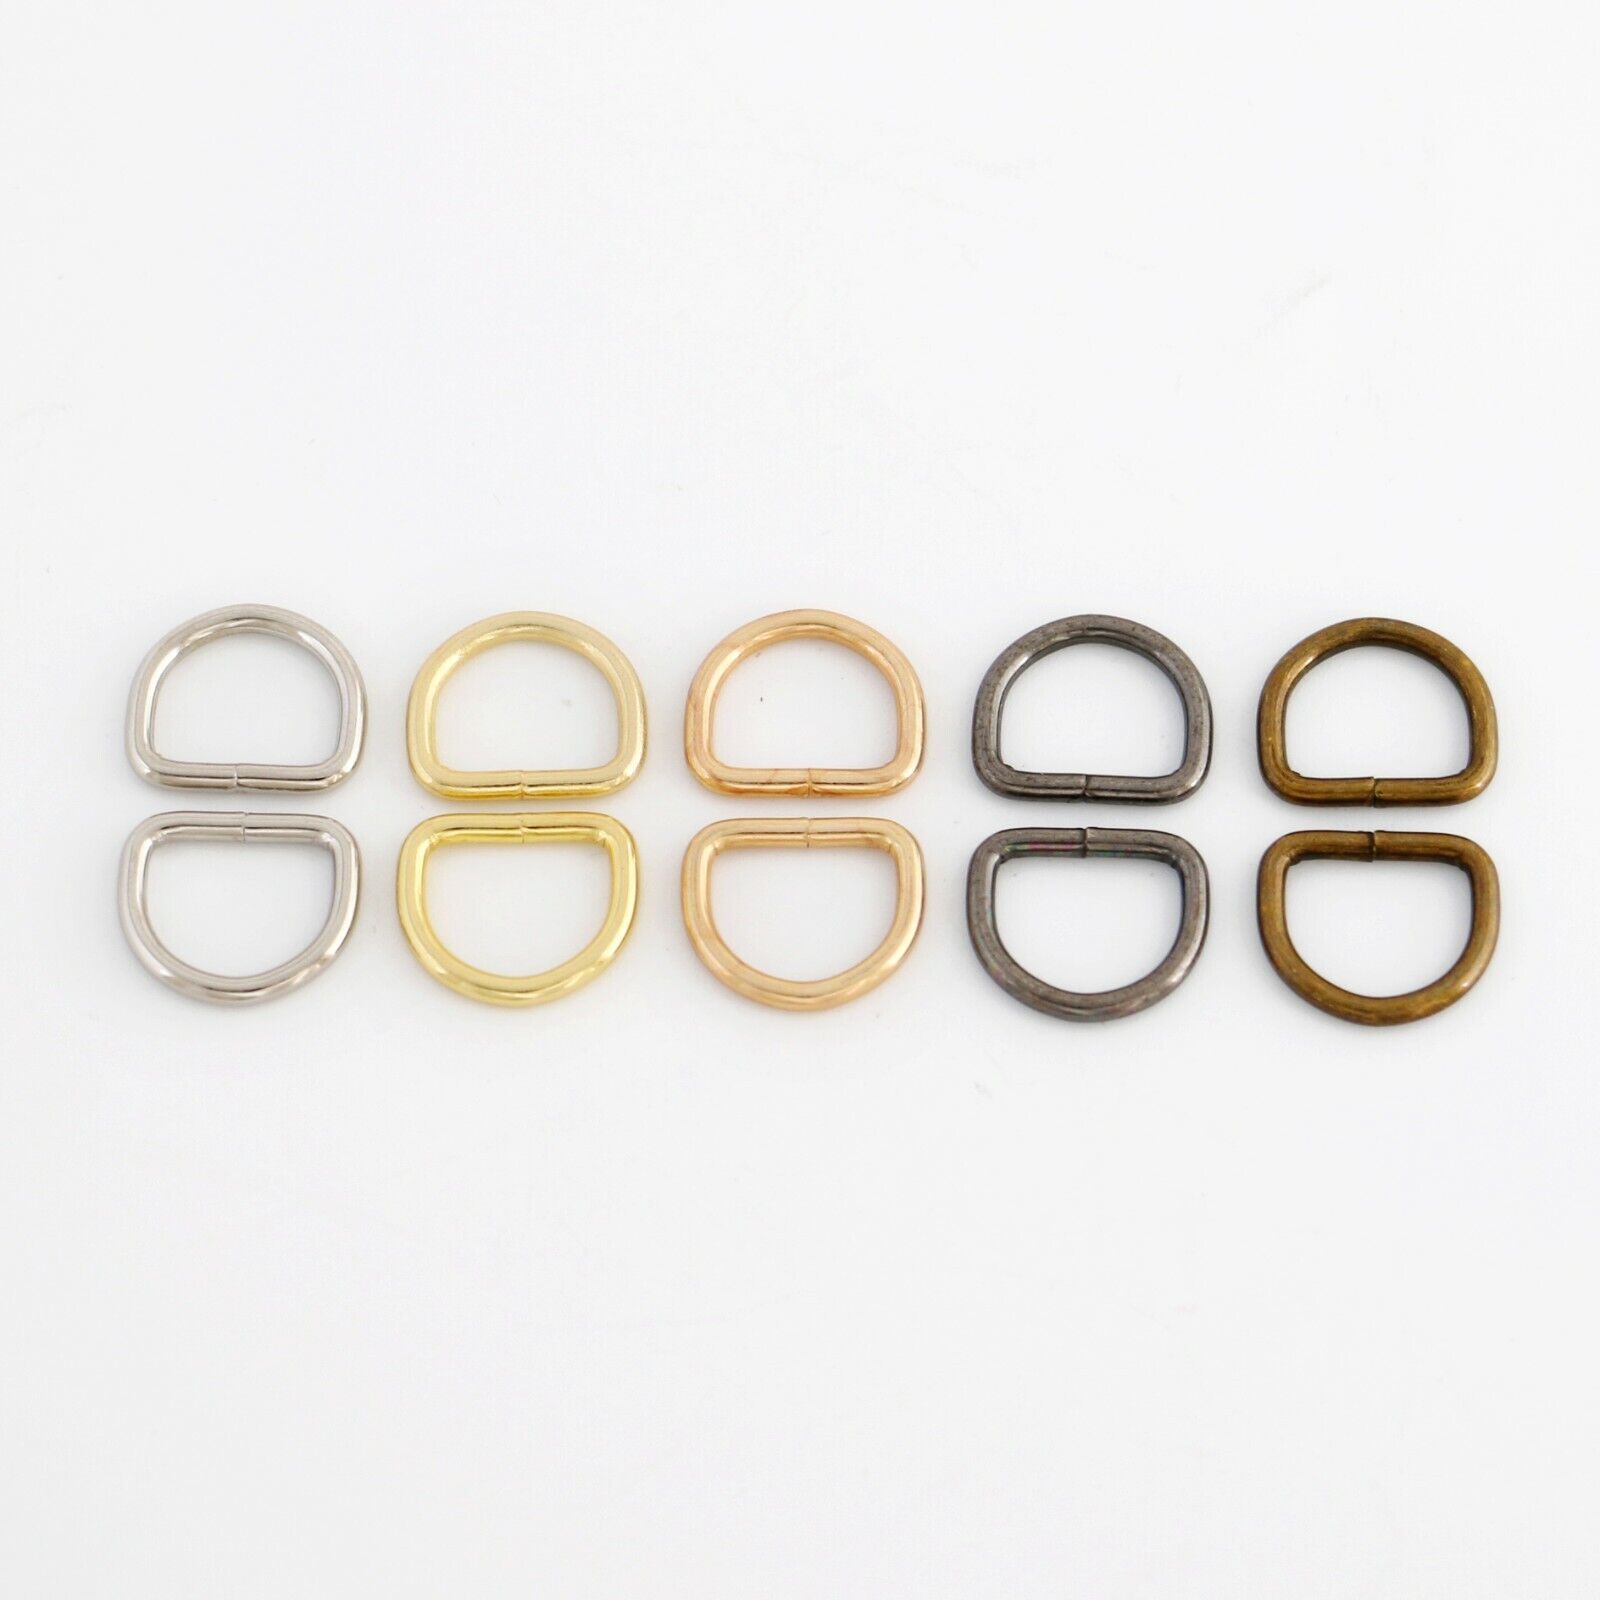 Metal D-Ring Welded ,for straps,purses,bags,Choose quantity Size & color (usa) Fioday Does not apply - фотография #2